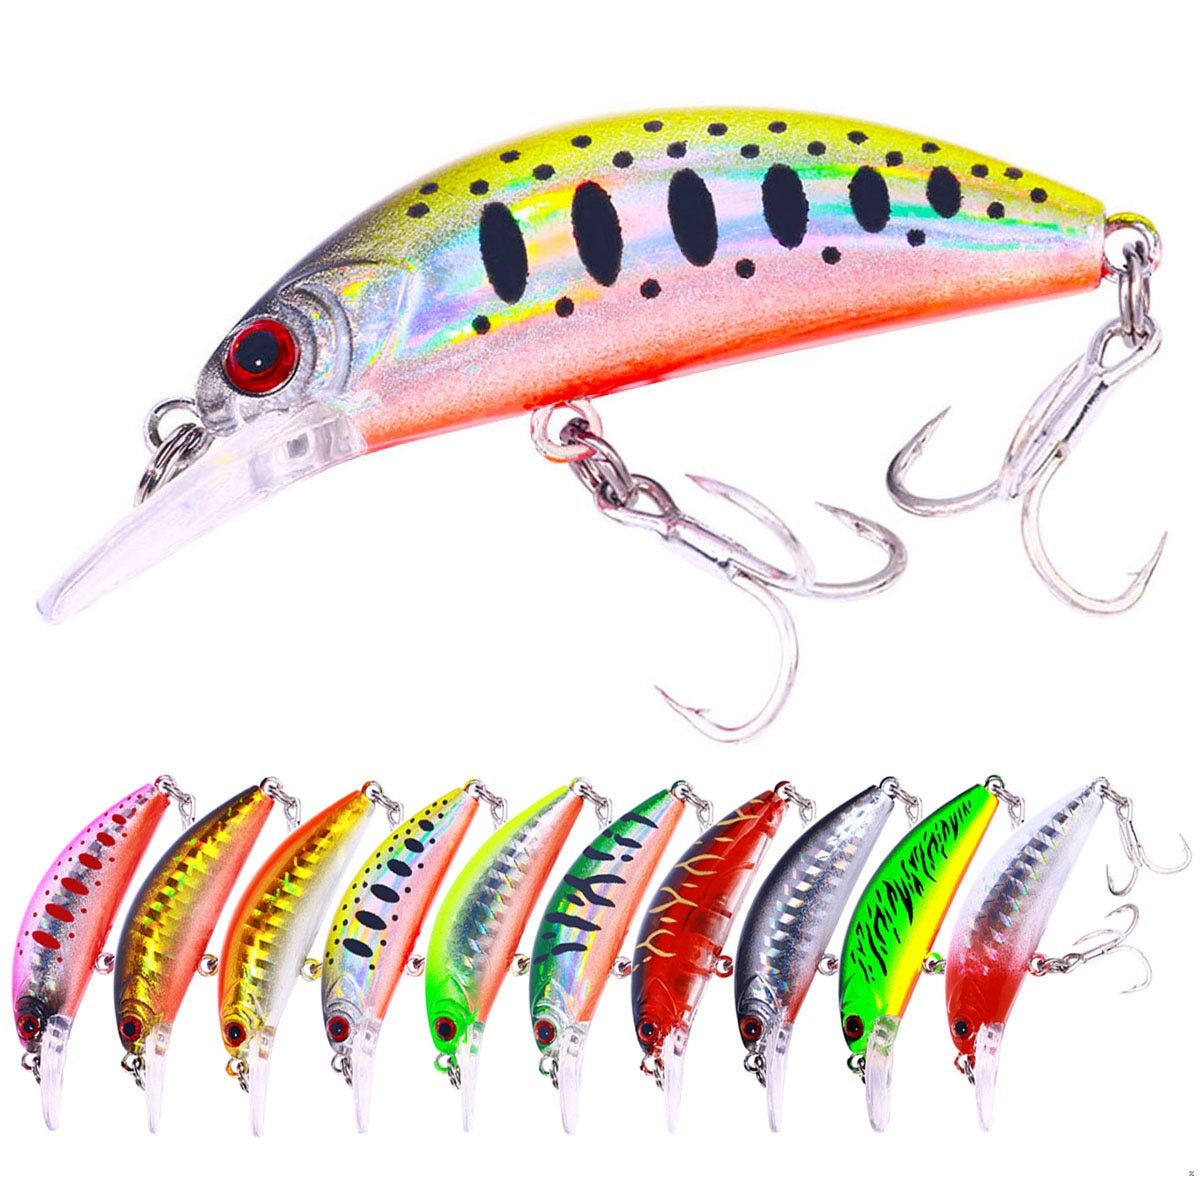 Dr.Fish Minnow Bass Fishing Lures 6.2cm 5.5g